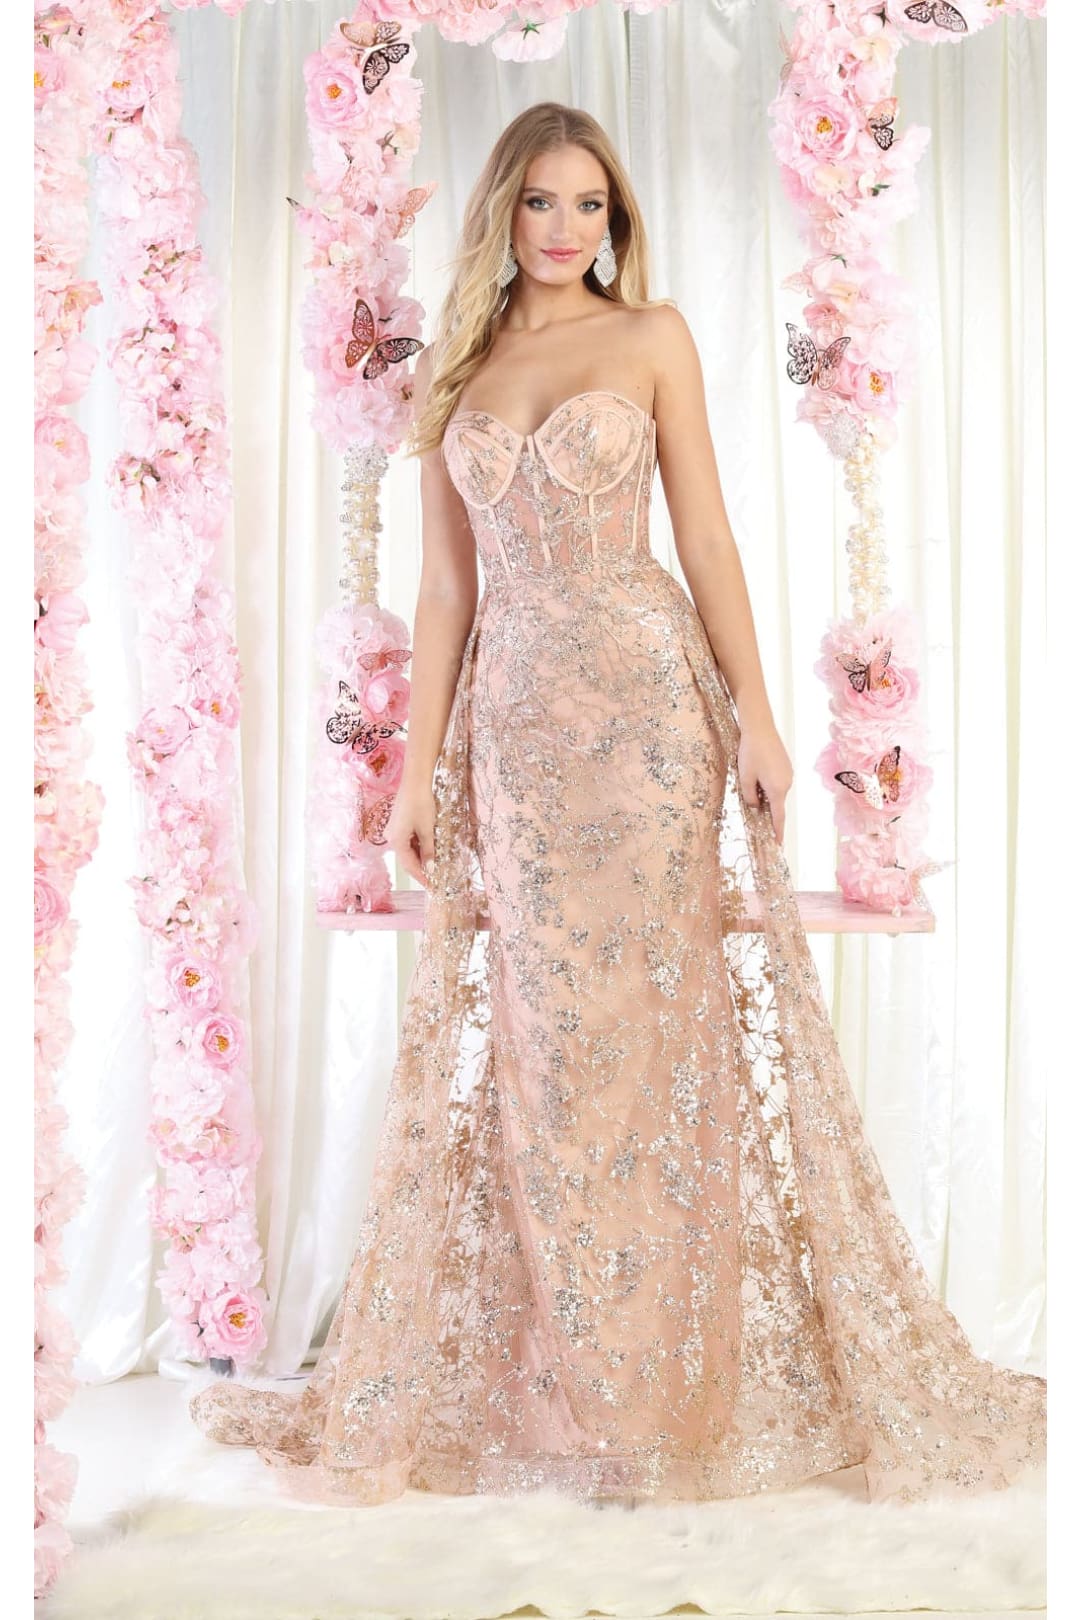 Red Carpet Stunning Lace Gown - LA1837 - ROSEGOLD / 2